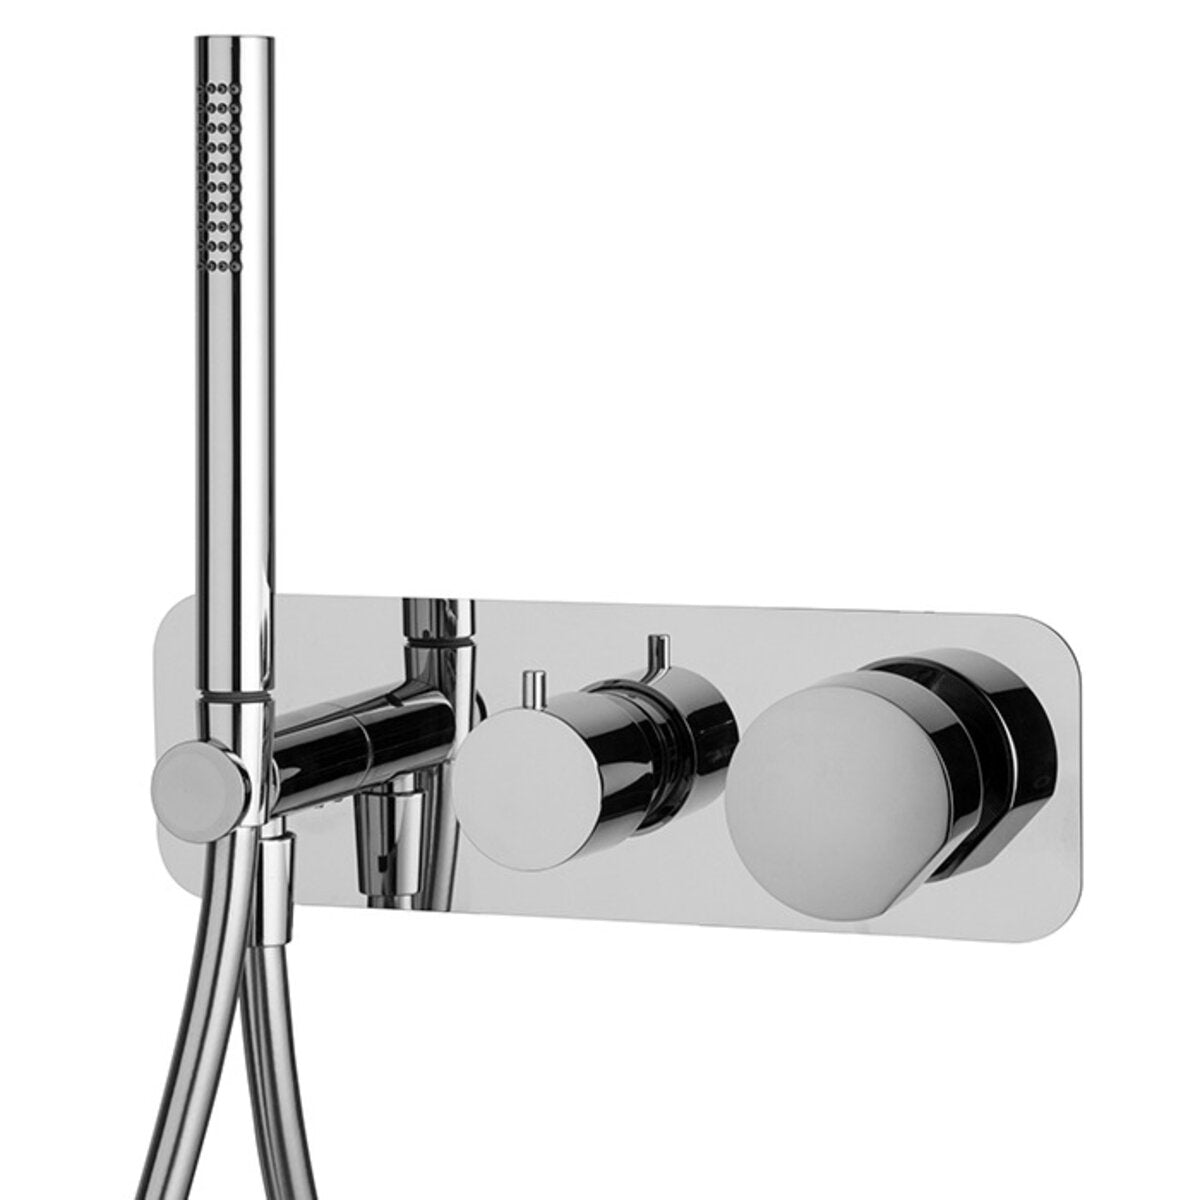 S2 handle for Fima Carlo Frattini mixer So brushed nickel